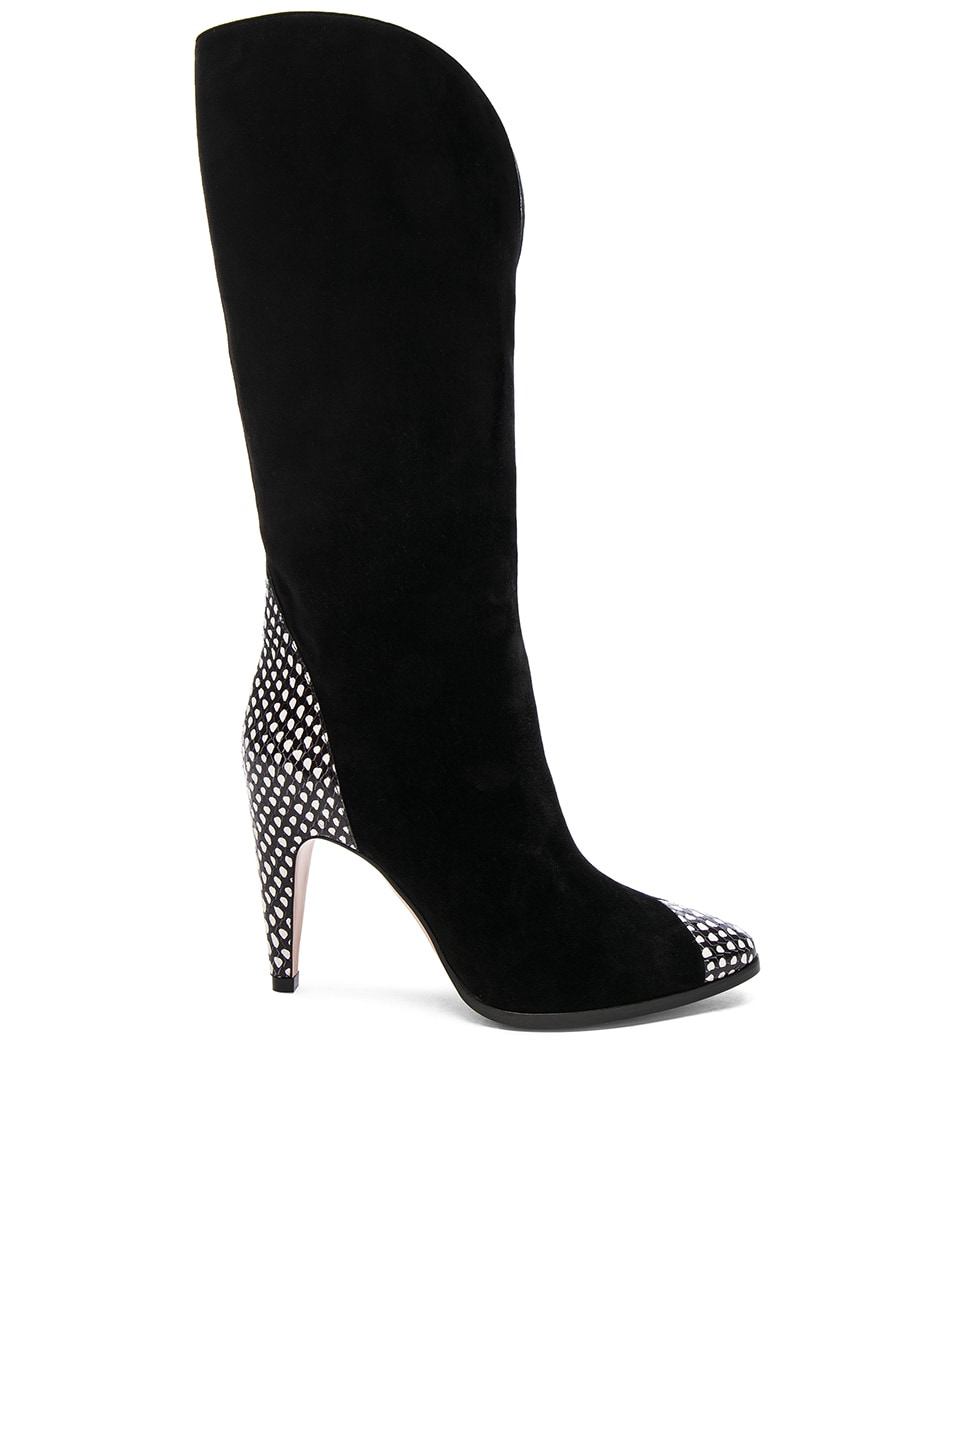 Givenchy Snakeskin Trim Suede Boots in Black & White | FWRD